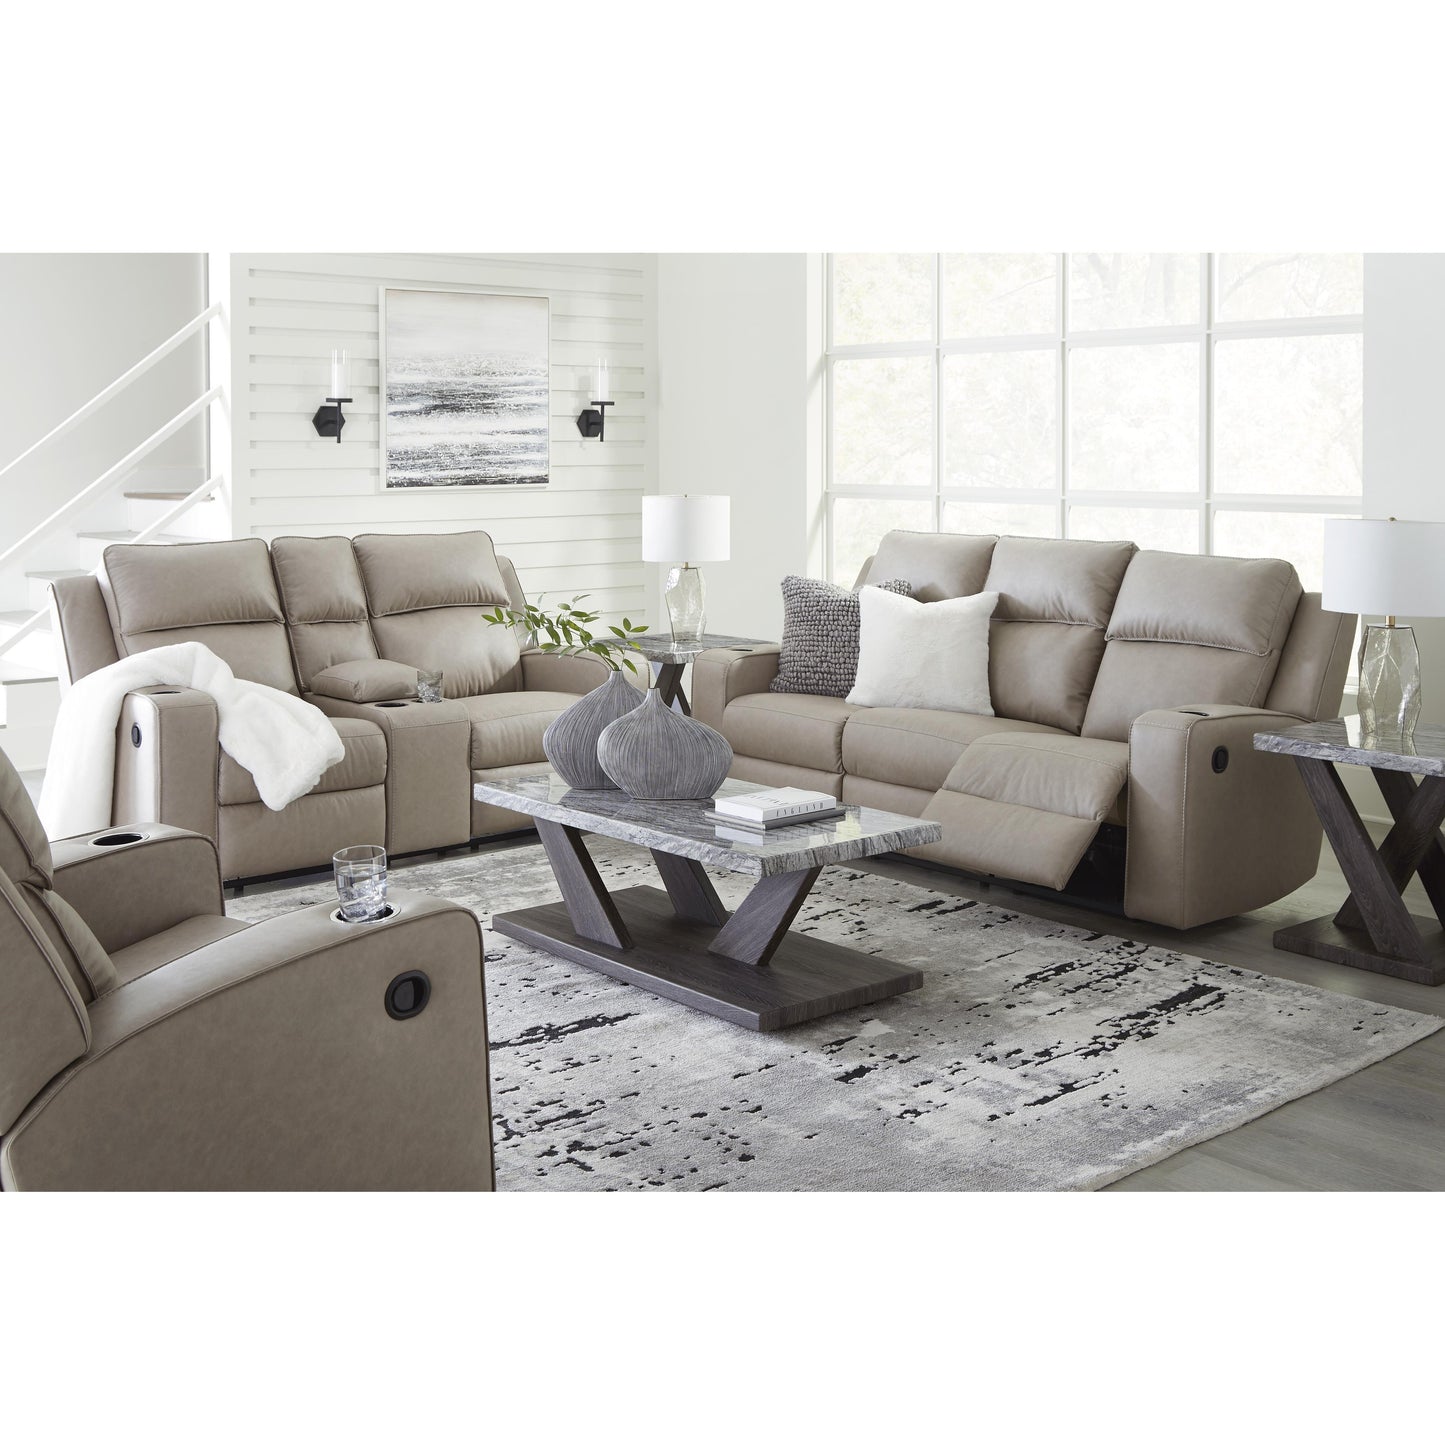 Signature Design by Ashley Lavenhorne Reclining Leather Look Loveseat 6330794 IMAGE 13